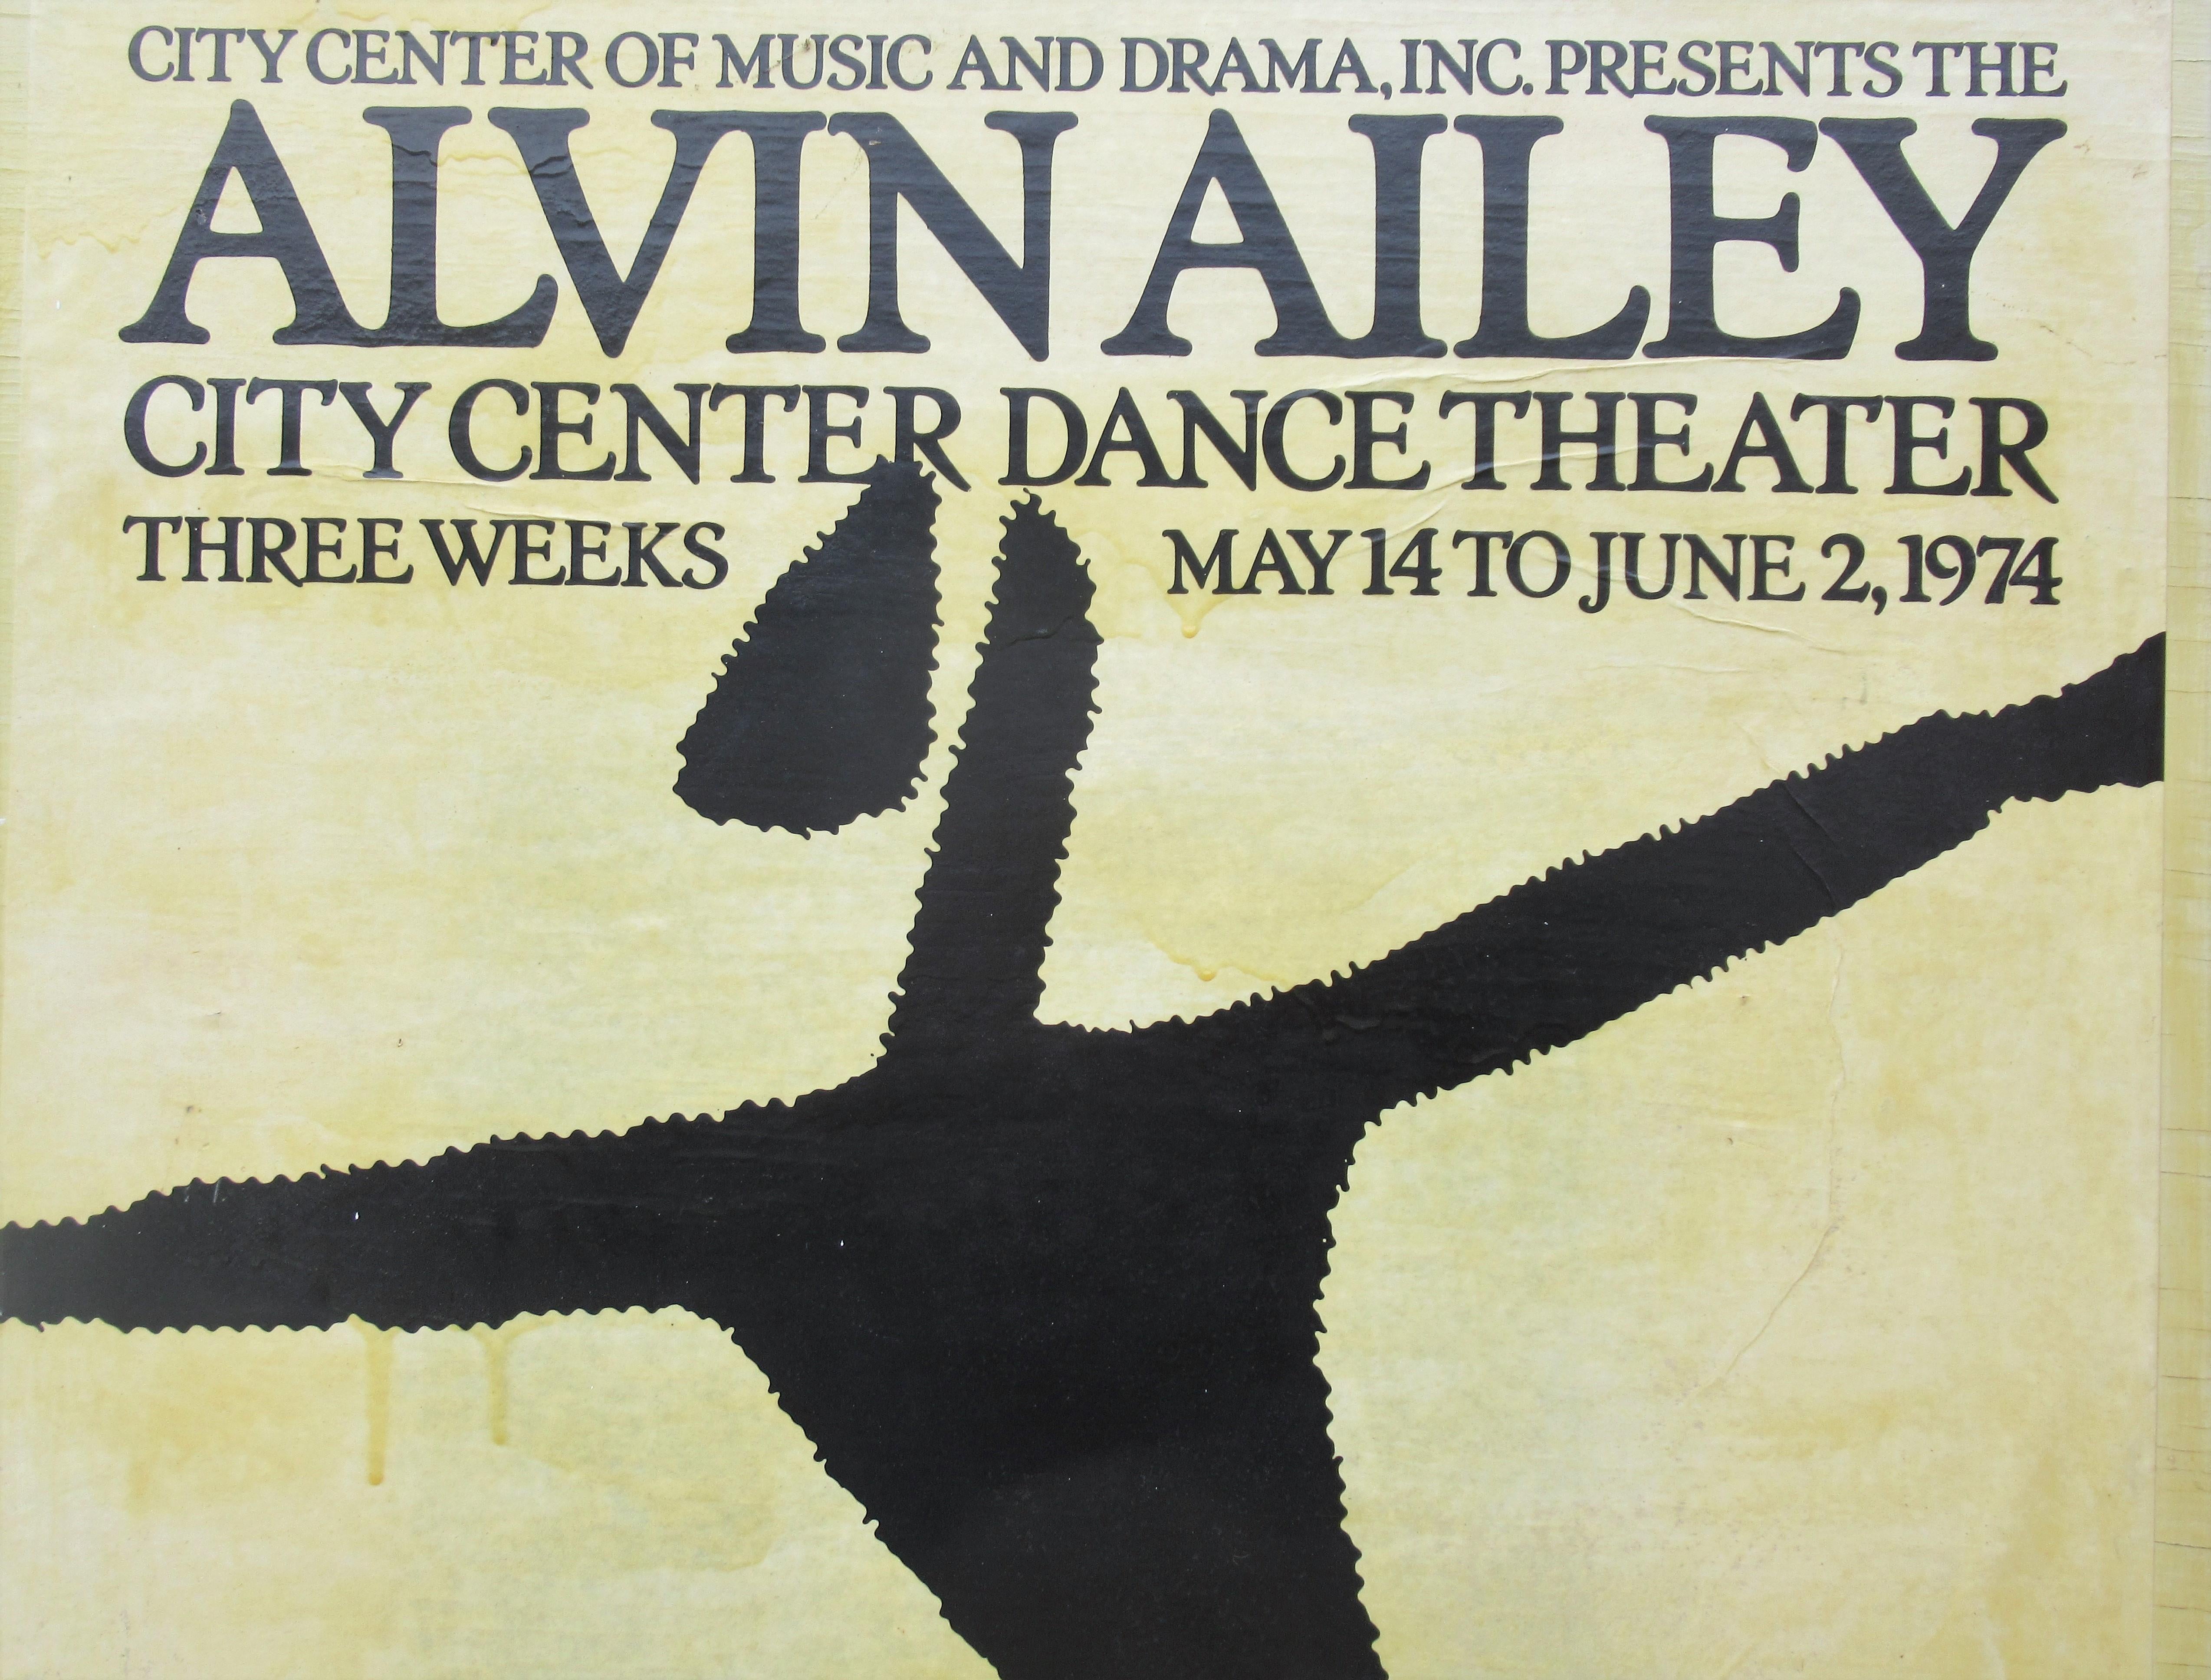 Alvin Ailey American Dance Theater lithograph poster by artist Michael Hampton distributed exclusively by Darien House - New York City, 1974. Poster has long ago been varnished and laid down on painted plywood panel for hanging. Beautiful imagery